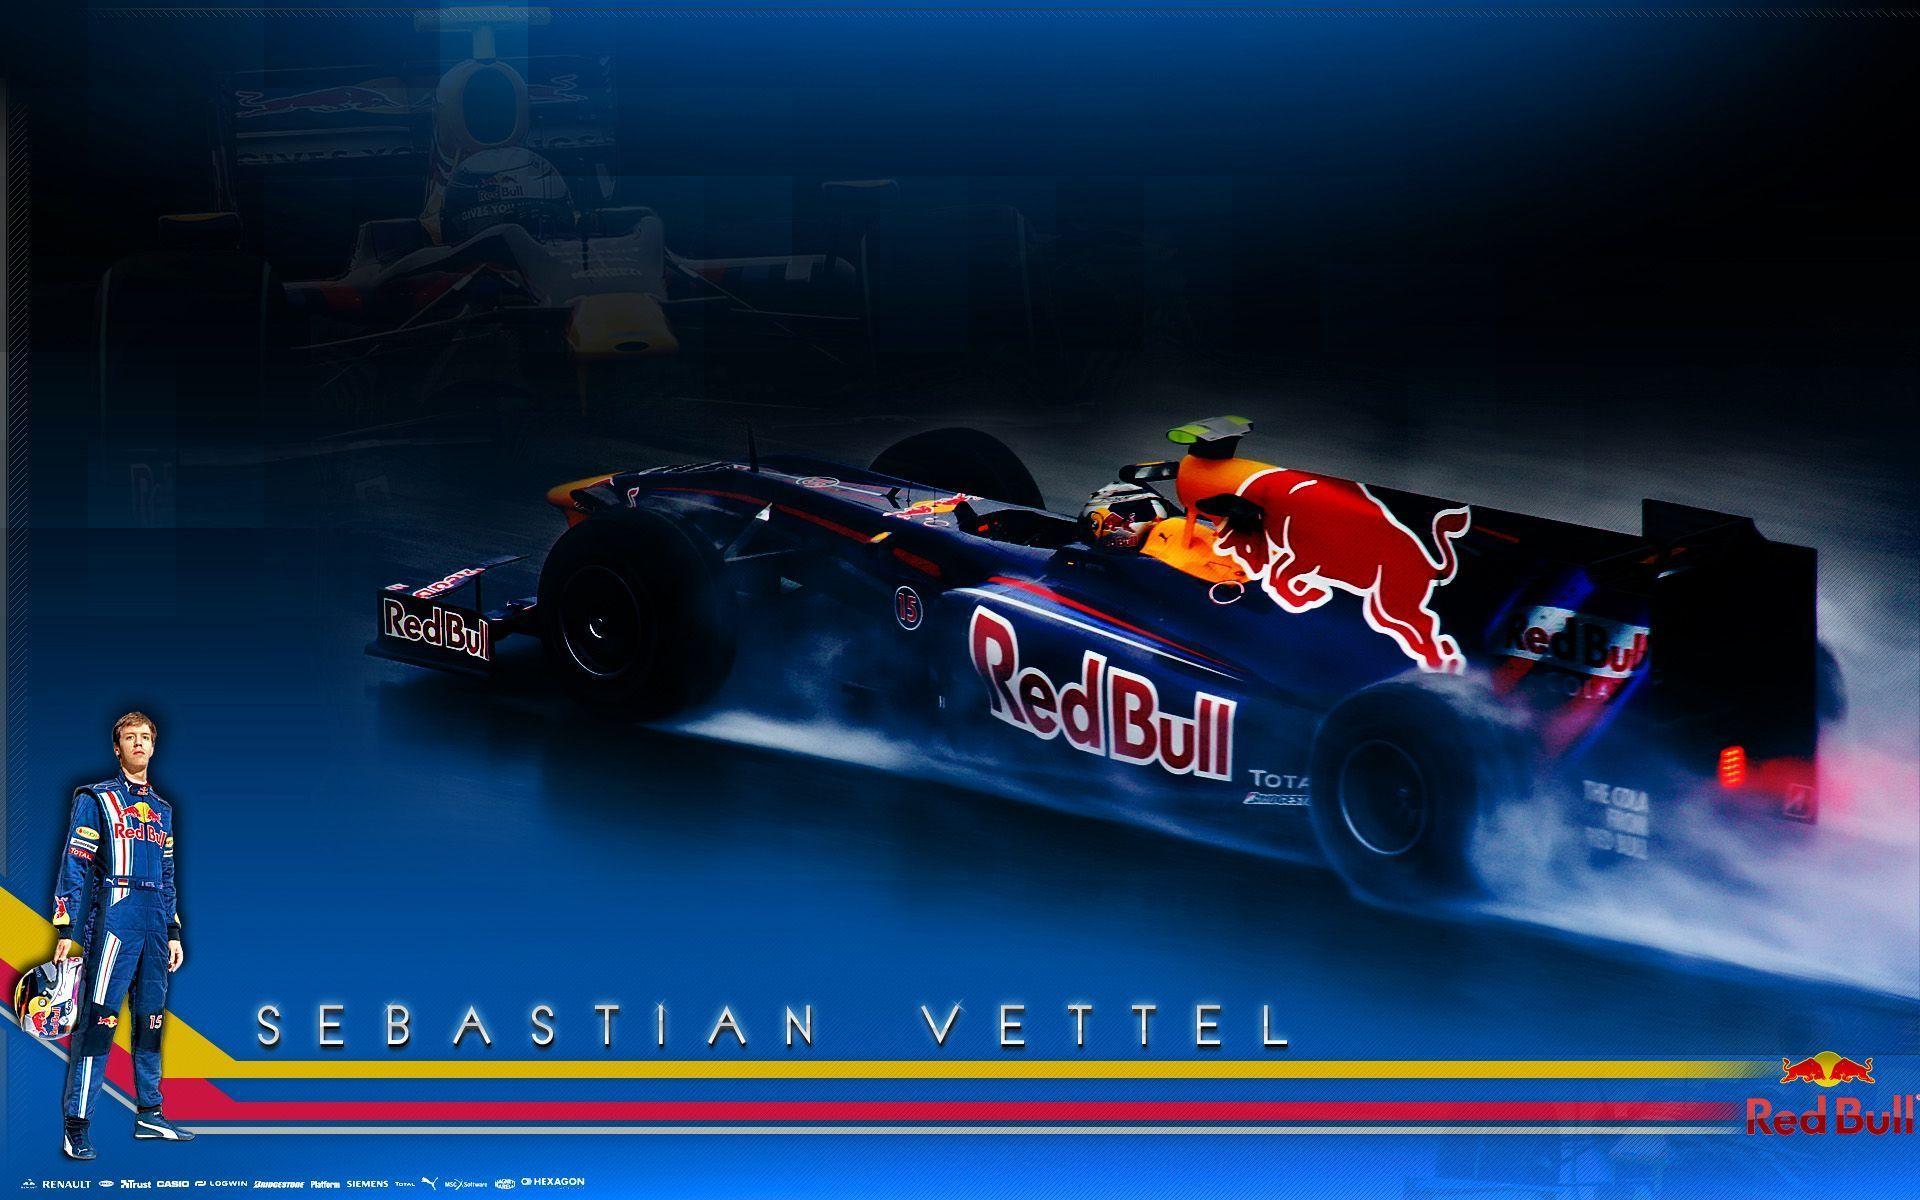 Red Bull F1 Wallpaper High Definition #RjG. Cars. Red